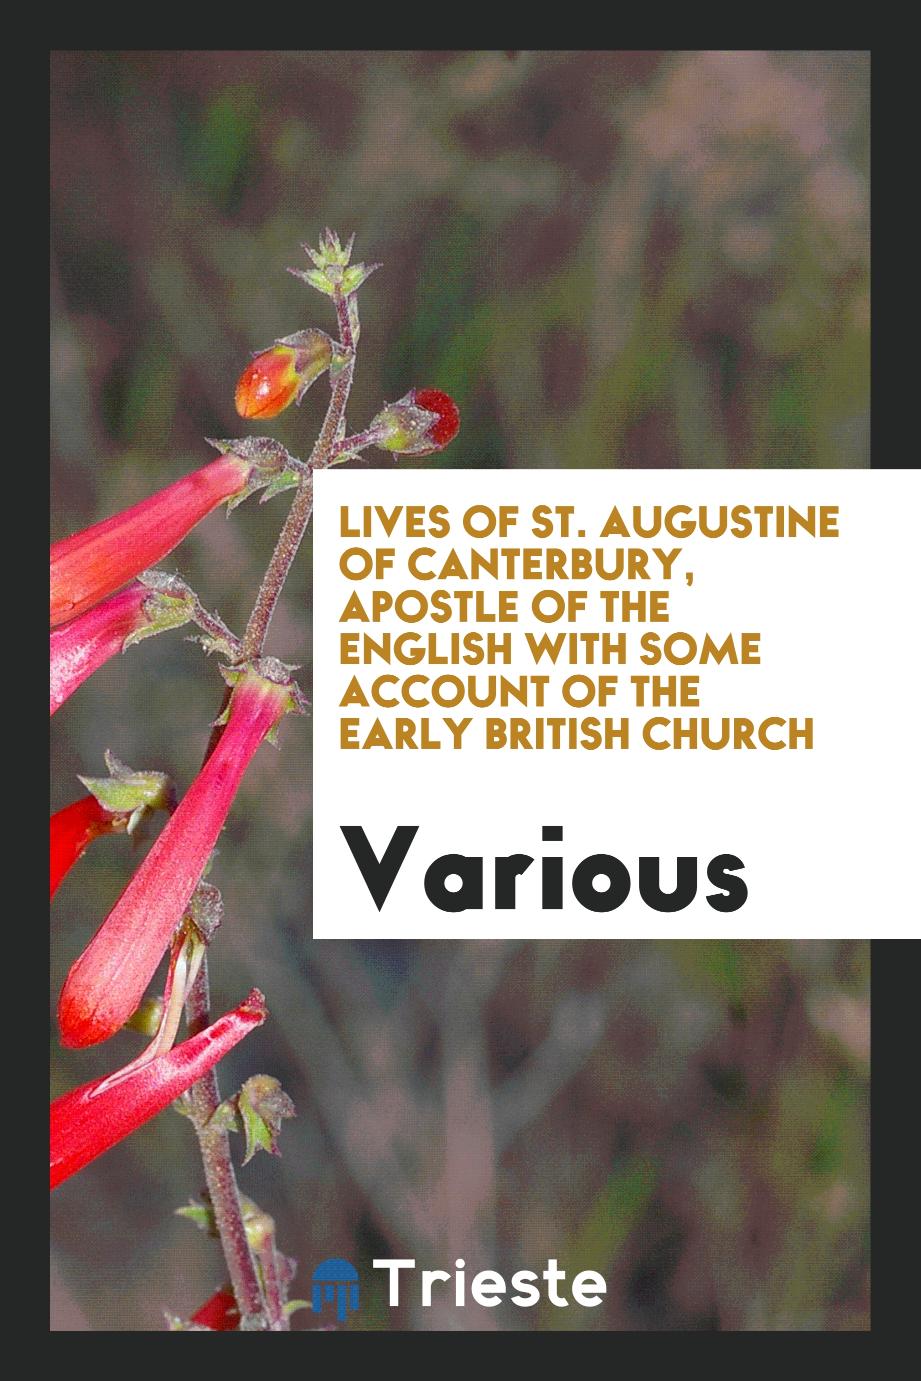 Lives of St. Augustine of Canterbury, Apostle of the English with some Account of the Early British Church